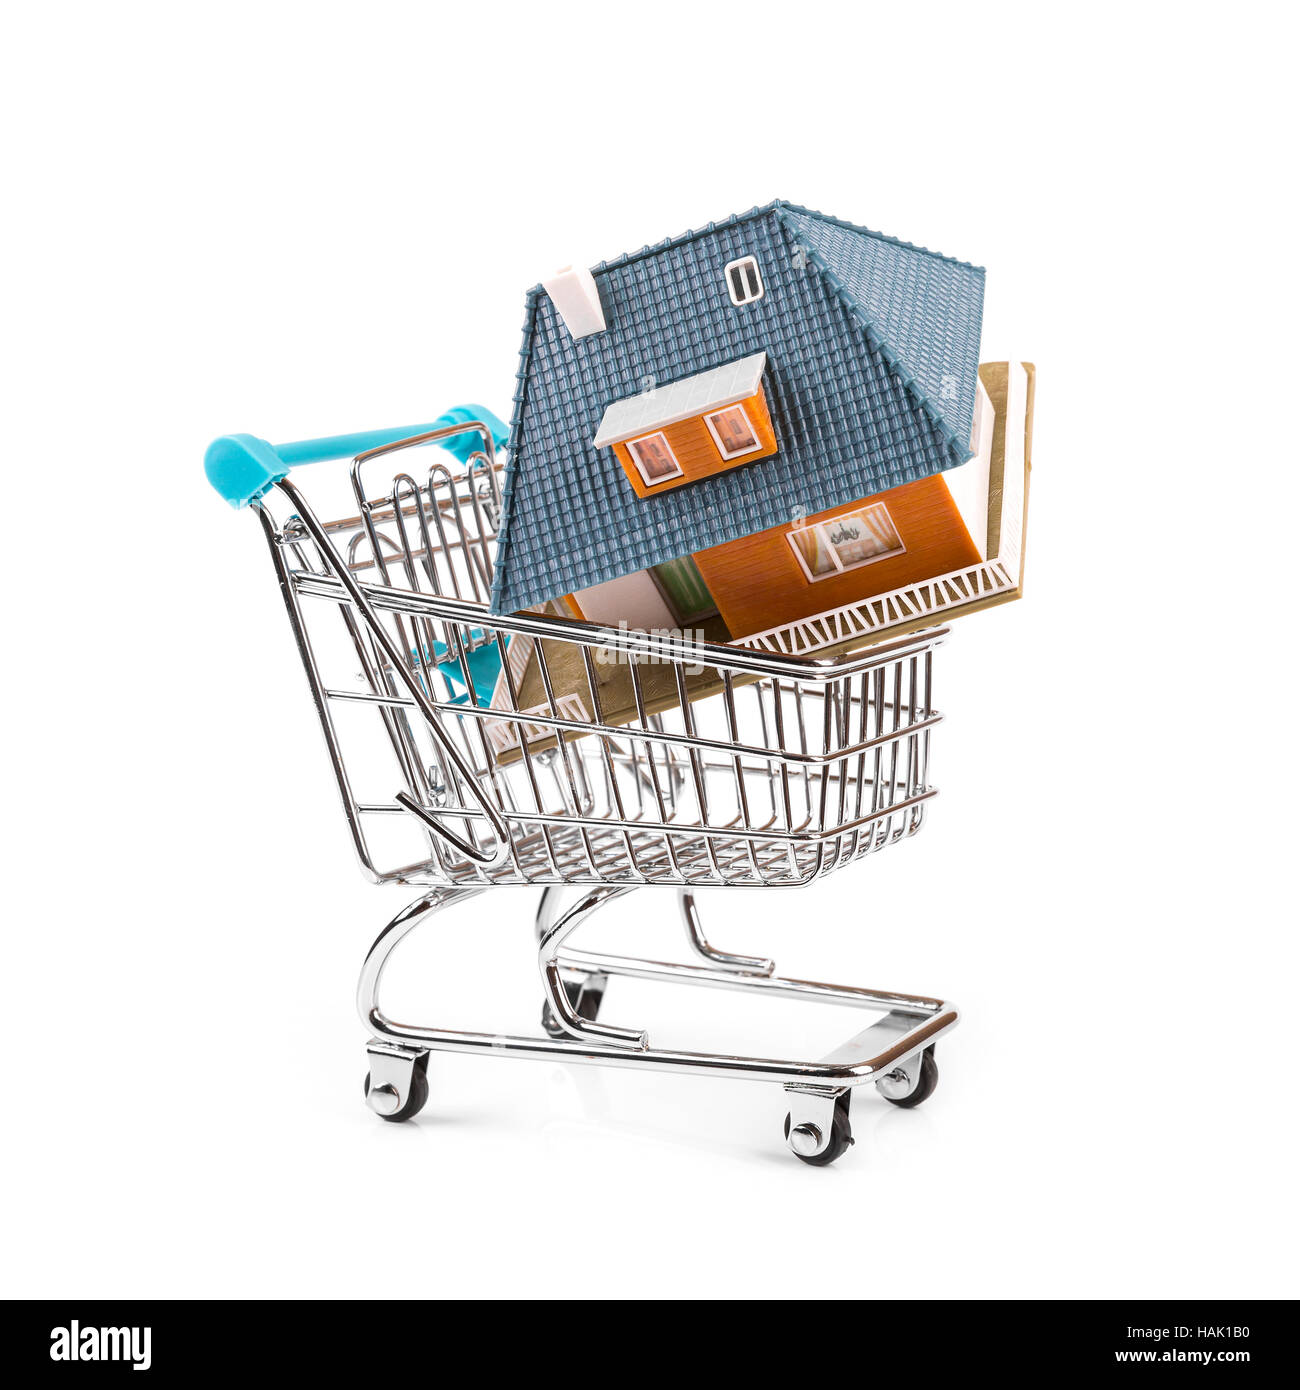 buy new real estate concept, house in a shopping cart Stock Photo